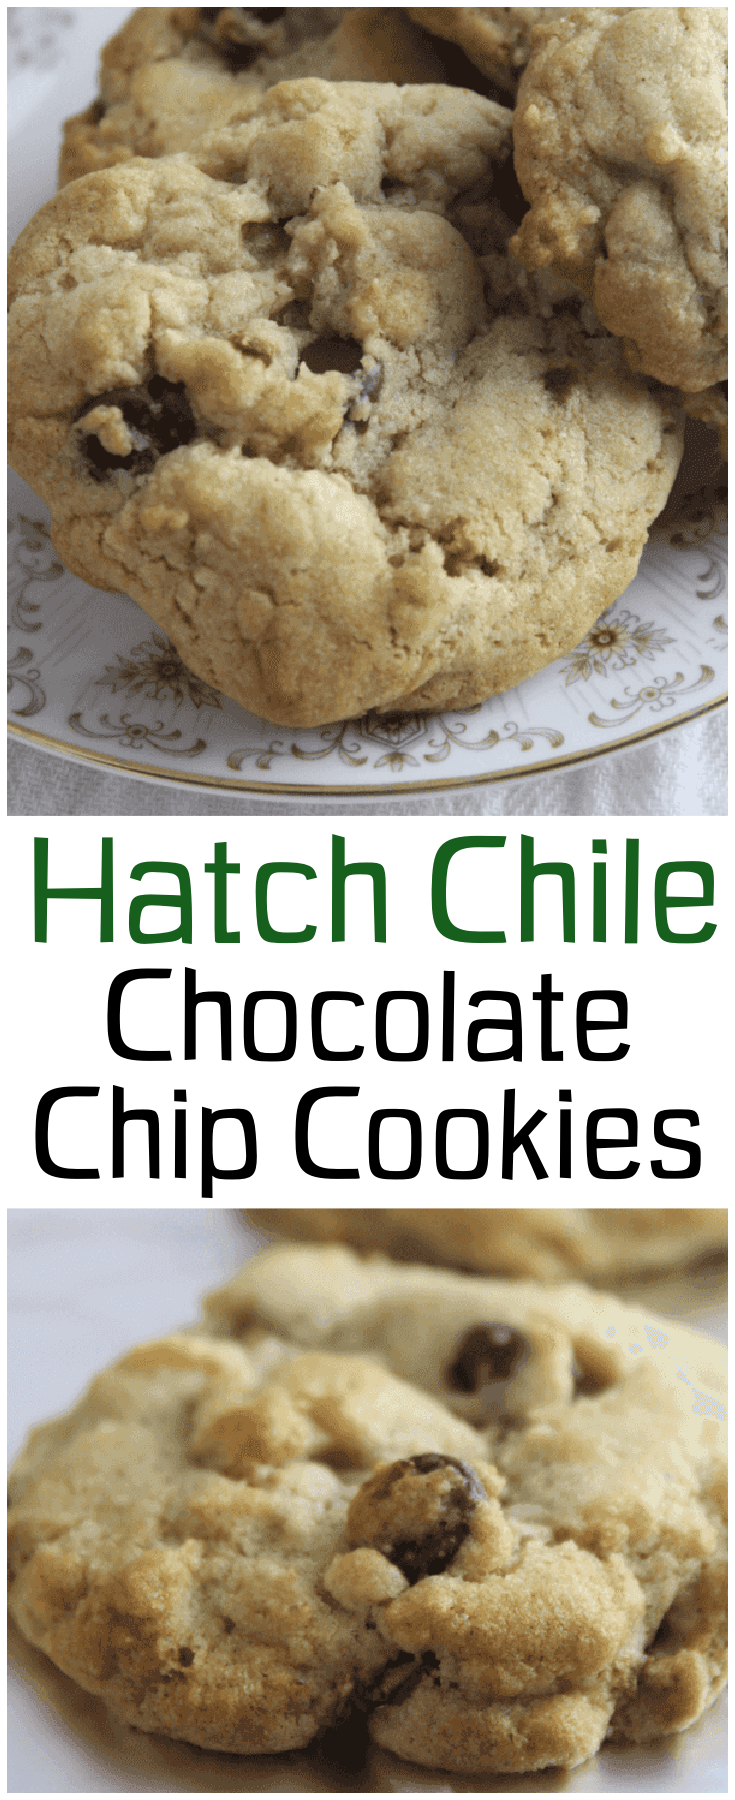 Hatch Chile Chocolate Chip Cookies give a punch of heat and a unique twist on the regular ol'chocolate chip cookies we know so well!